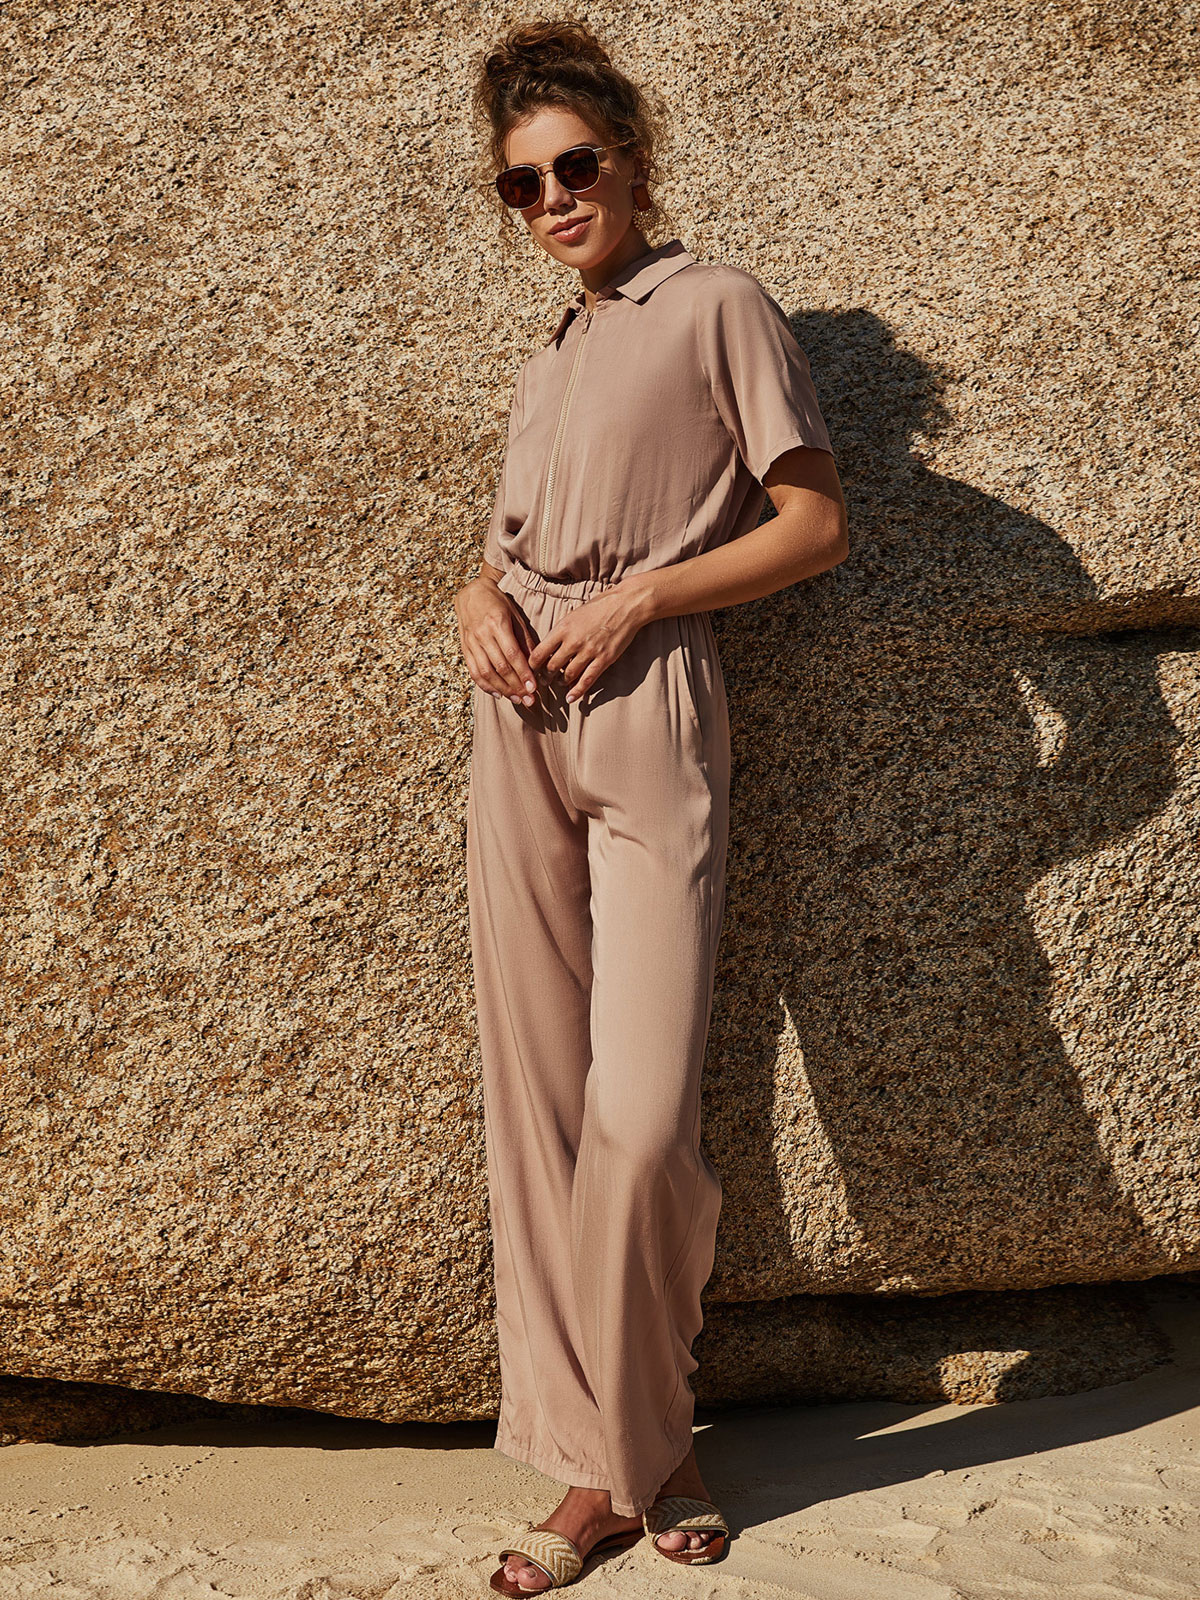 Women's Clothing Jumpsuits & Rompers | Deep Apricot Turndown Collar Short Sleeves Buttons Stretch Polyester Jumpsuits For Women - JQ03464